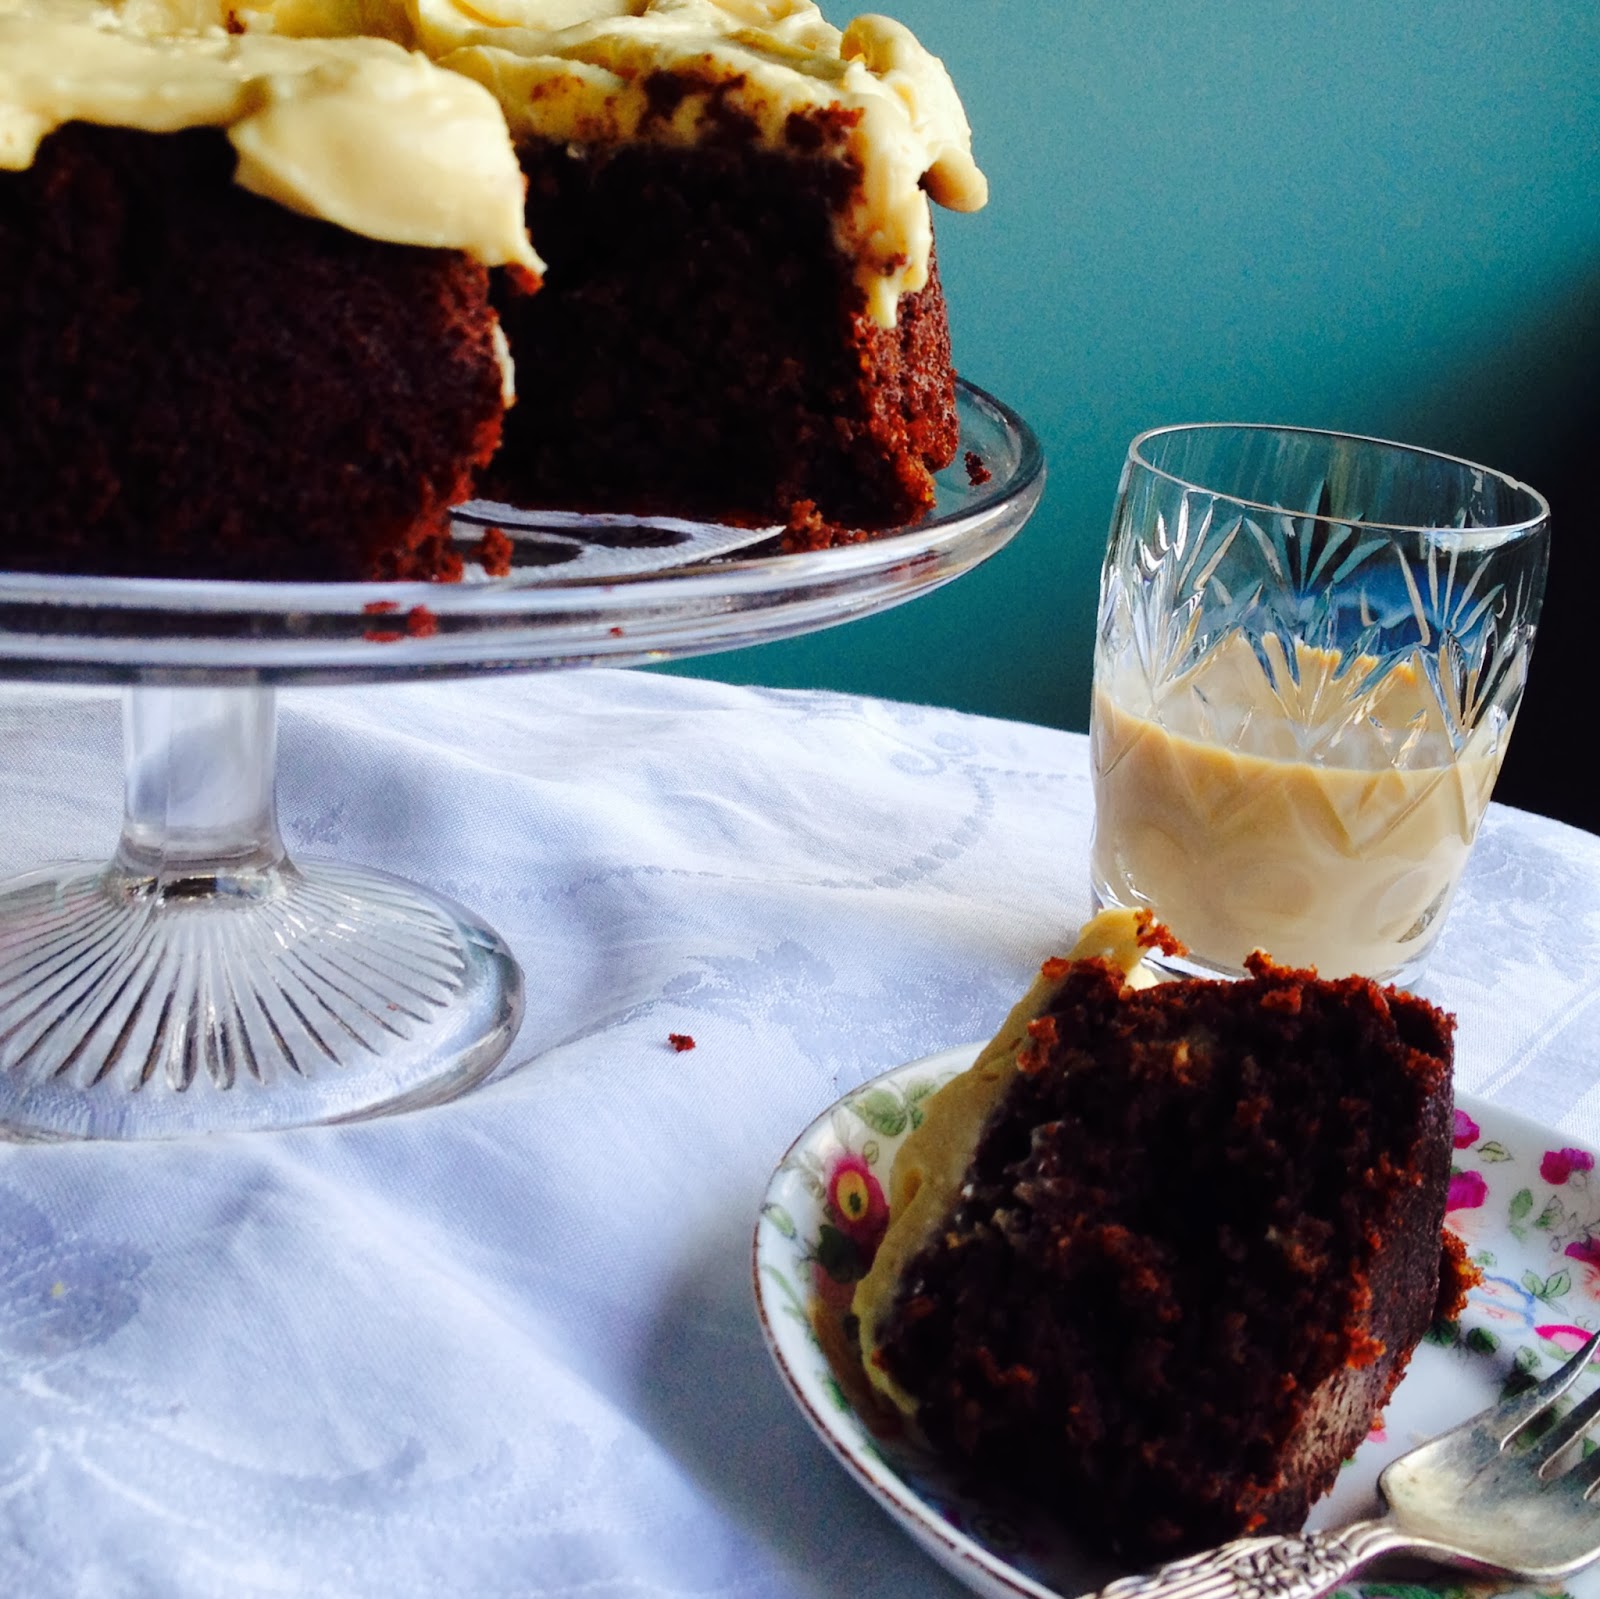 St Patrick's Day Chocolate Potato Cake With Irish Cream Frosting - Gluten-Free Photo And Recipe Credit: Lucy Corry/The Kitchenmaid